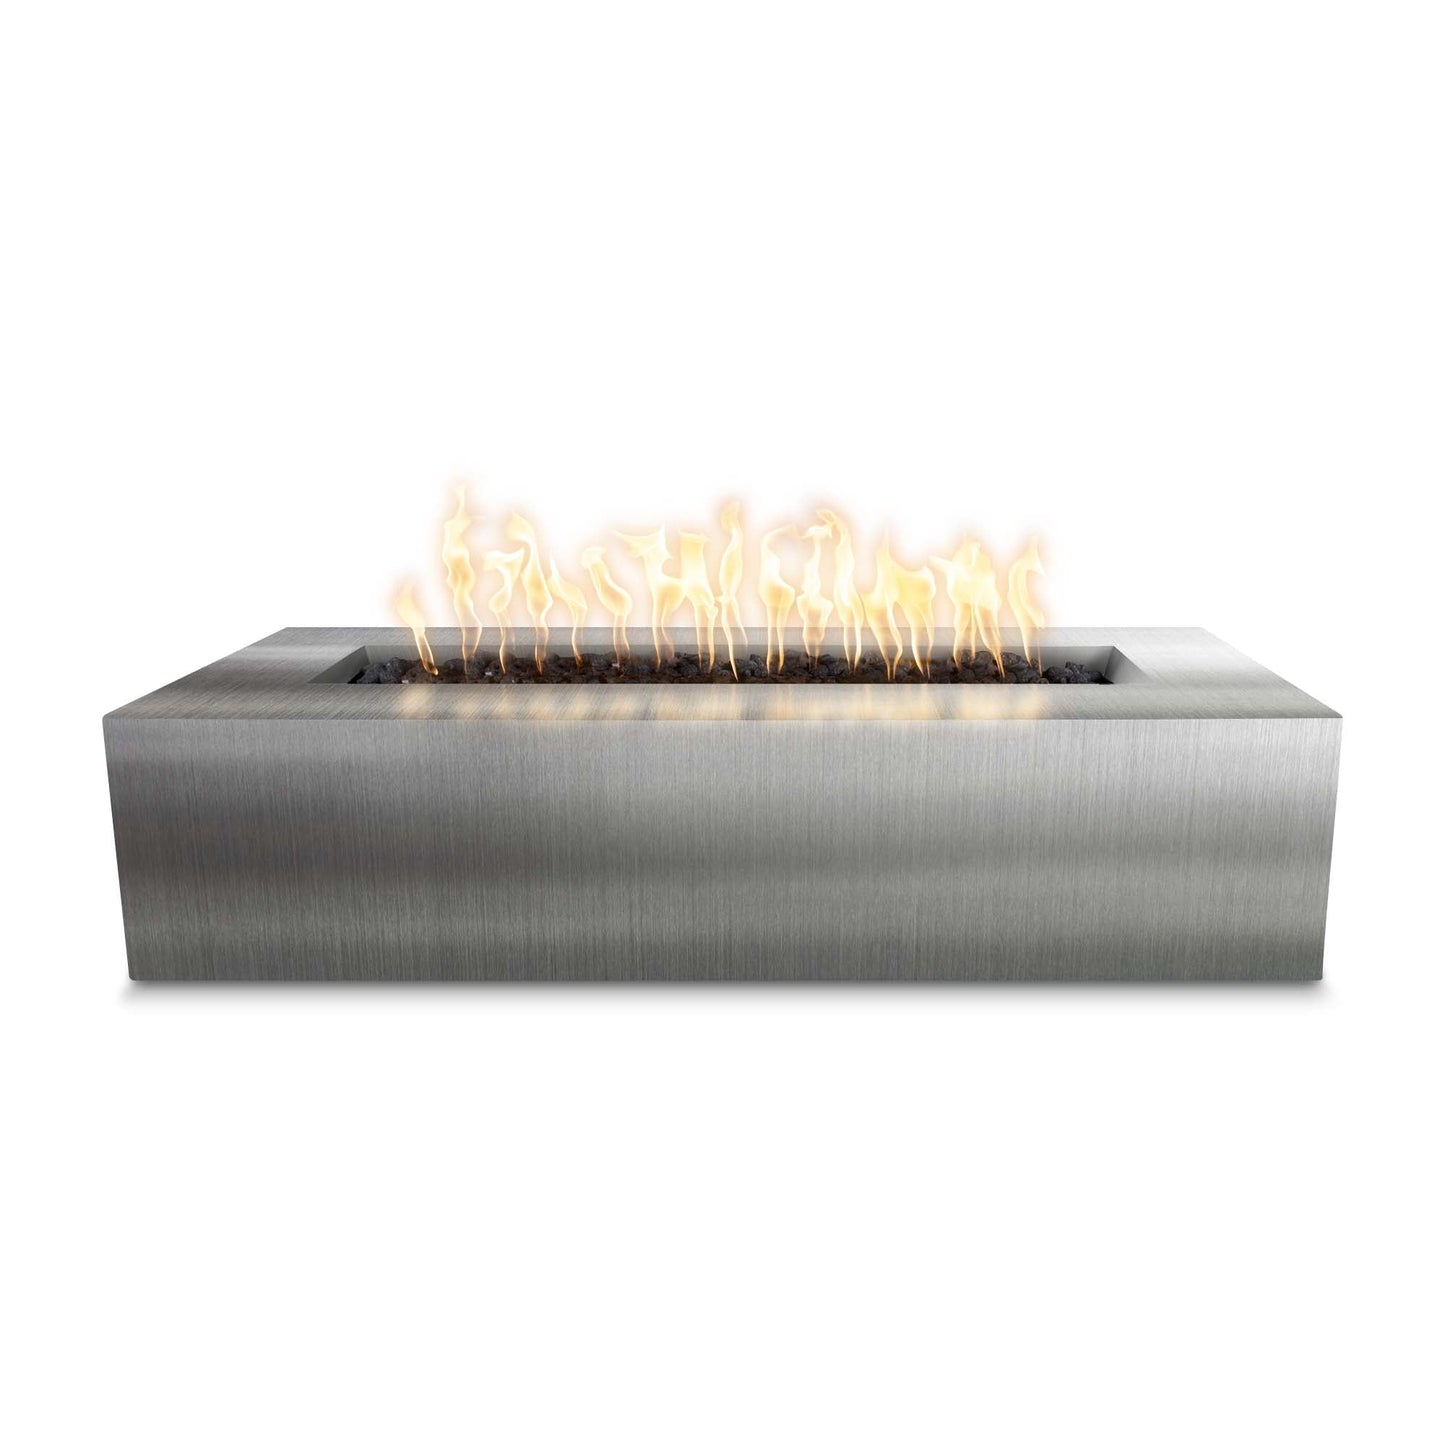 The Outdoor Plus Rectangular Regal 54" Stainless Steel Natural Gas Fire Pit with 12V Electronic Ignition